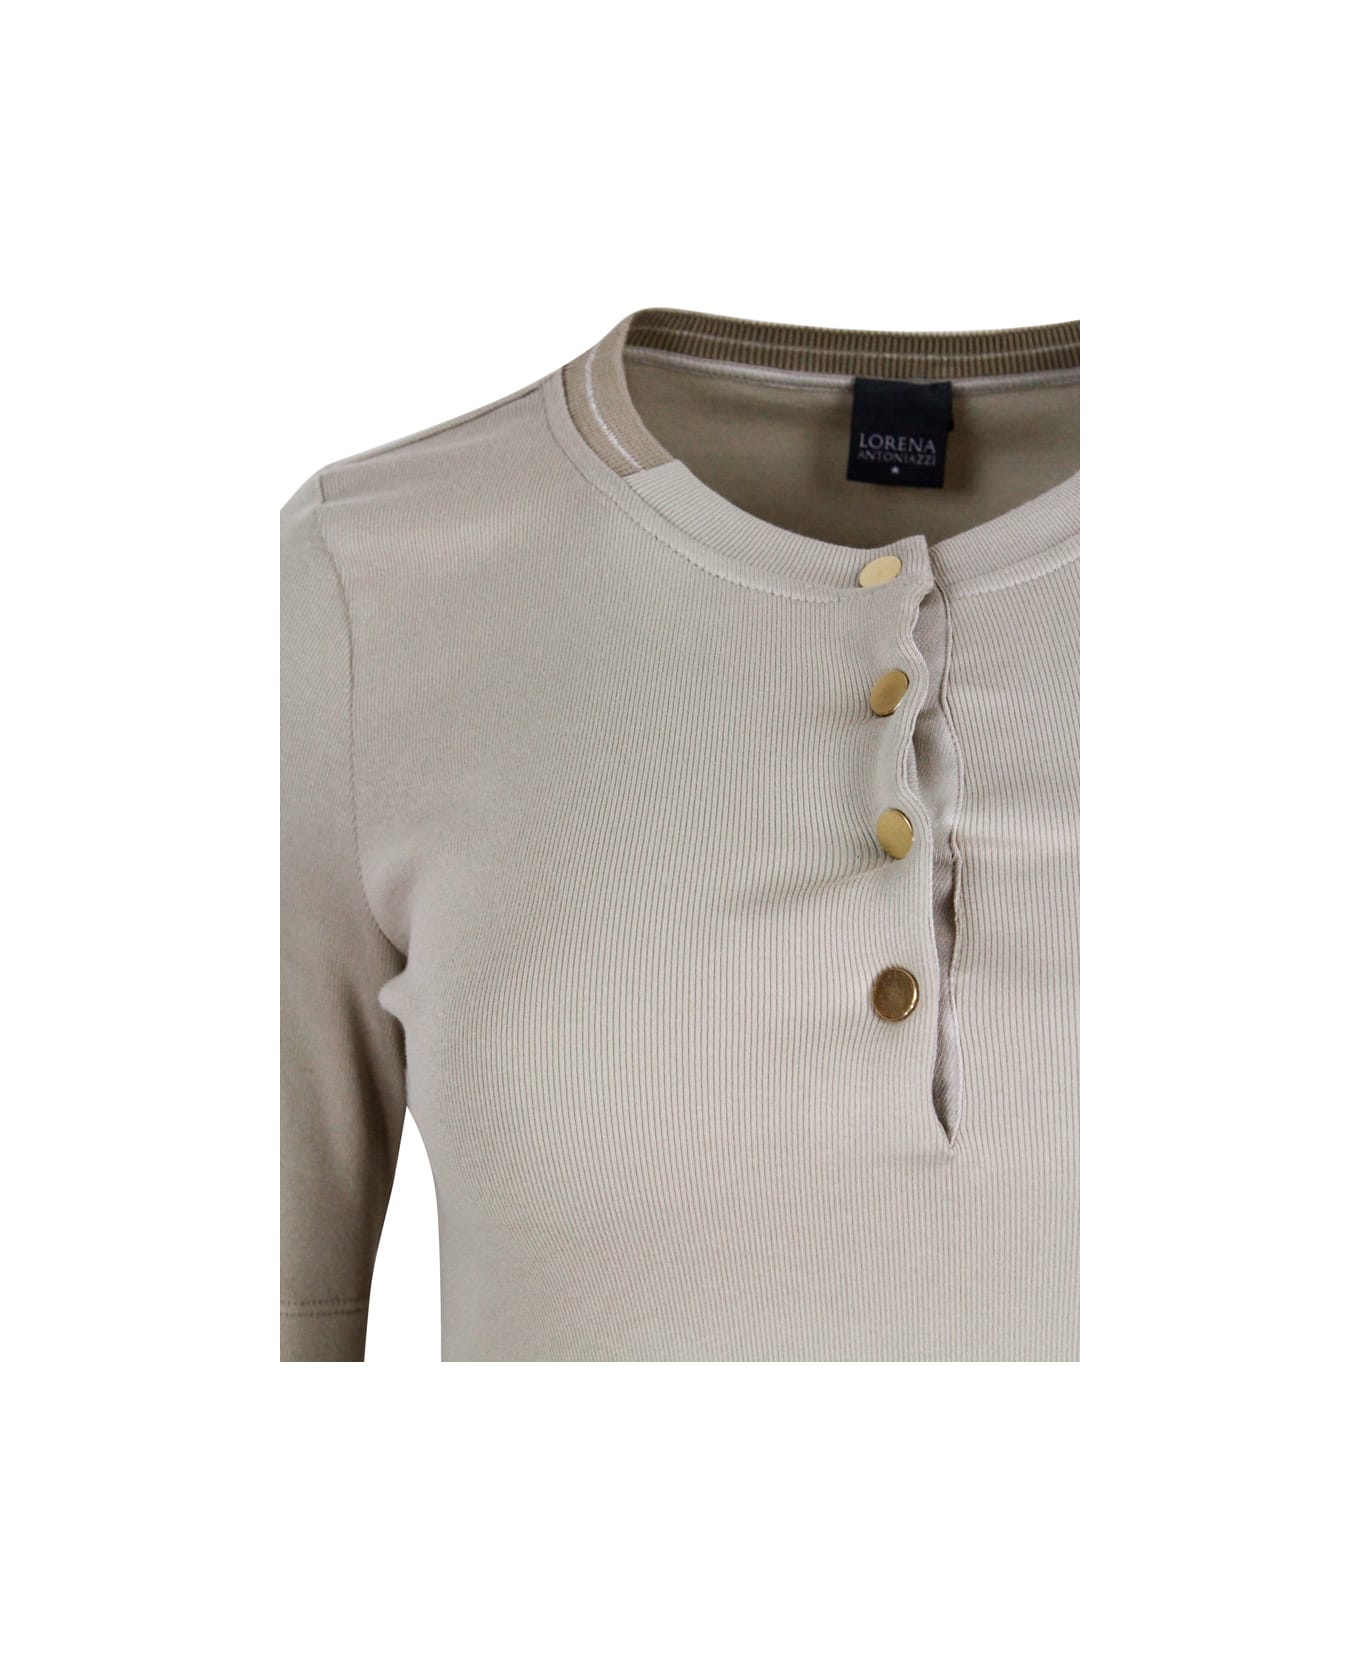 Lorena Antoniazzi Short-sleeved Ribbed Crew-neck Cotton T-shirt With Button Closure And Swarosky Star - Beige